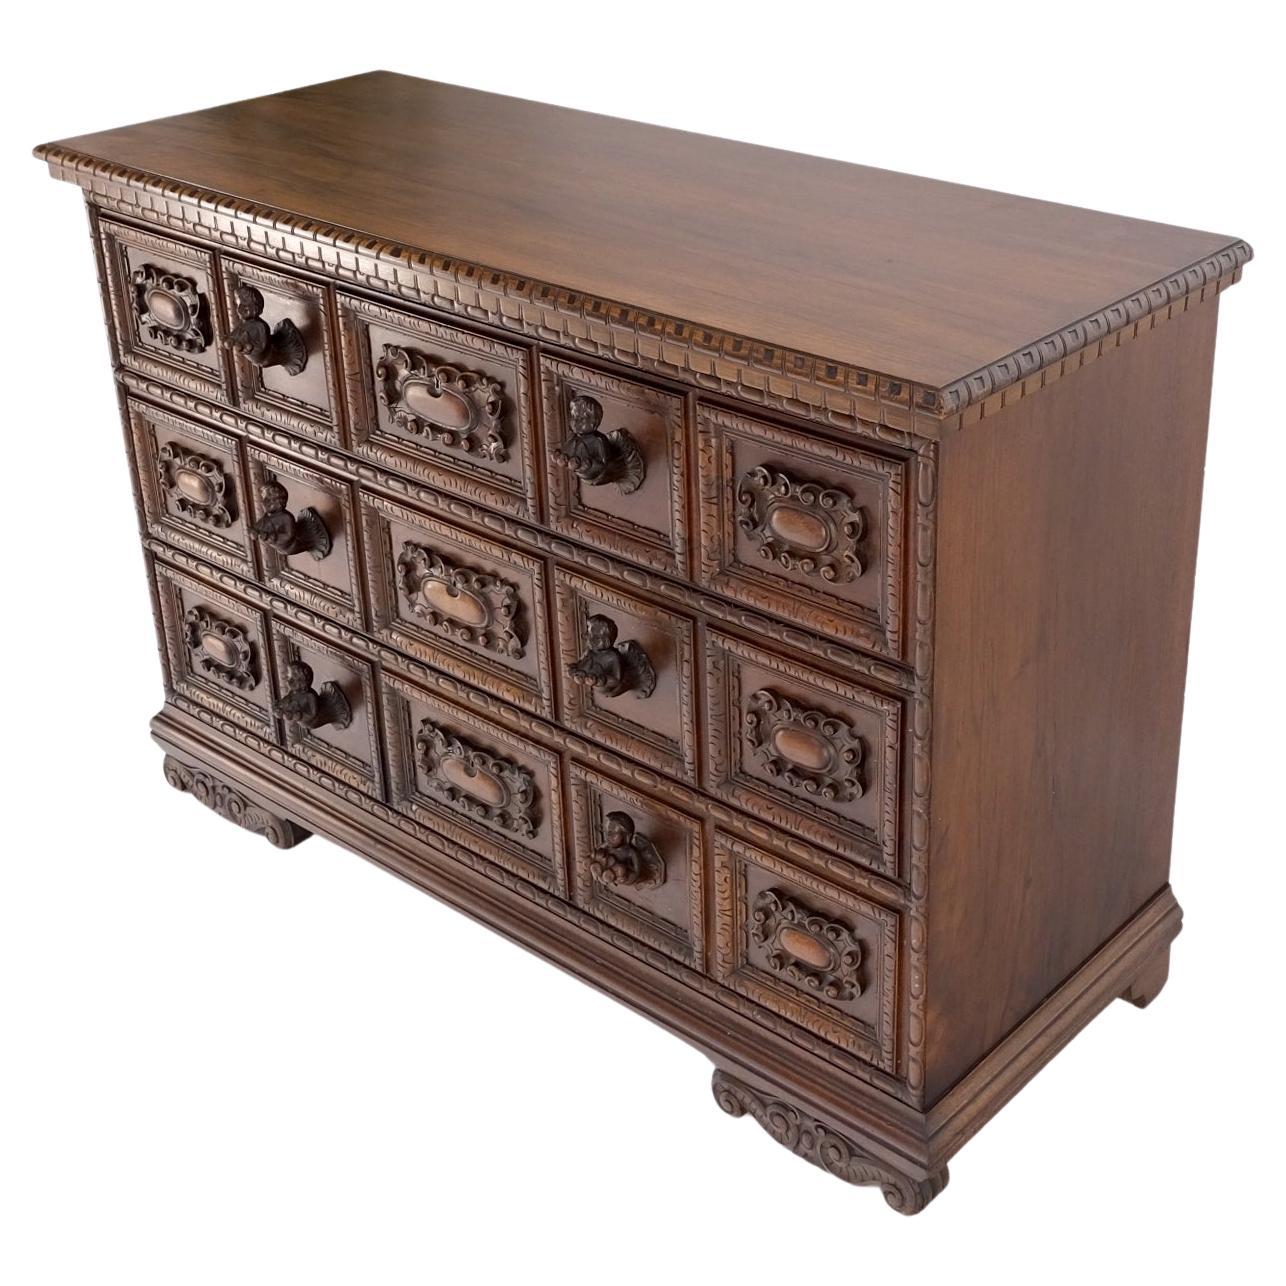 3 Dovetail Drawers Heavily Carved Wooden Pulls Rope Edge Bachelor Chest Dresser For Sale